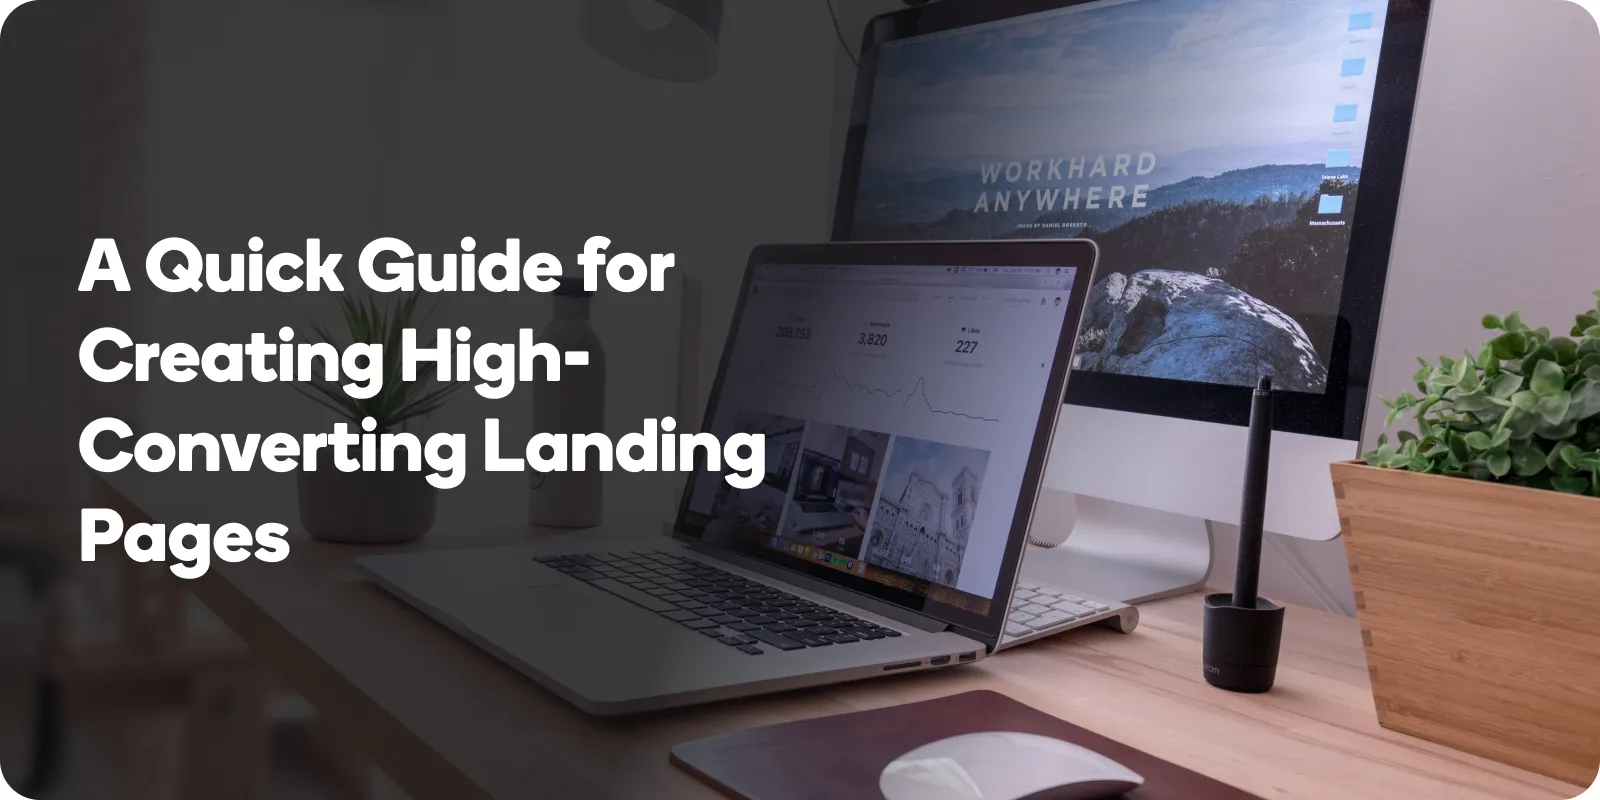 A-Quick-Guide-for-Creating-High-Converting-Landing-Pages